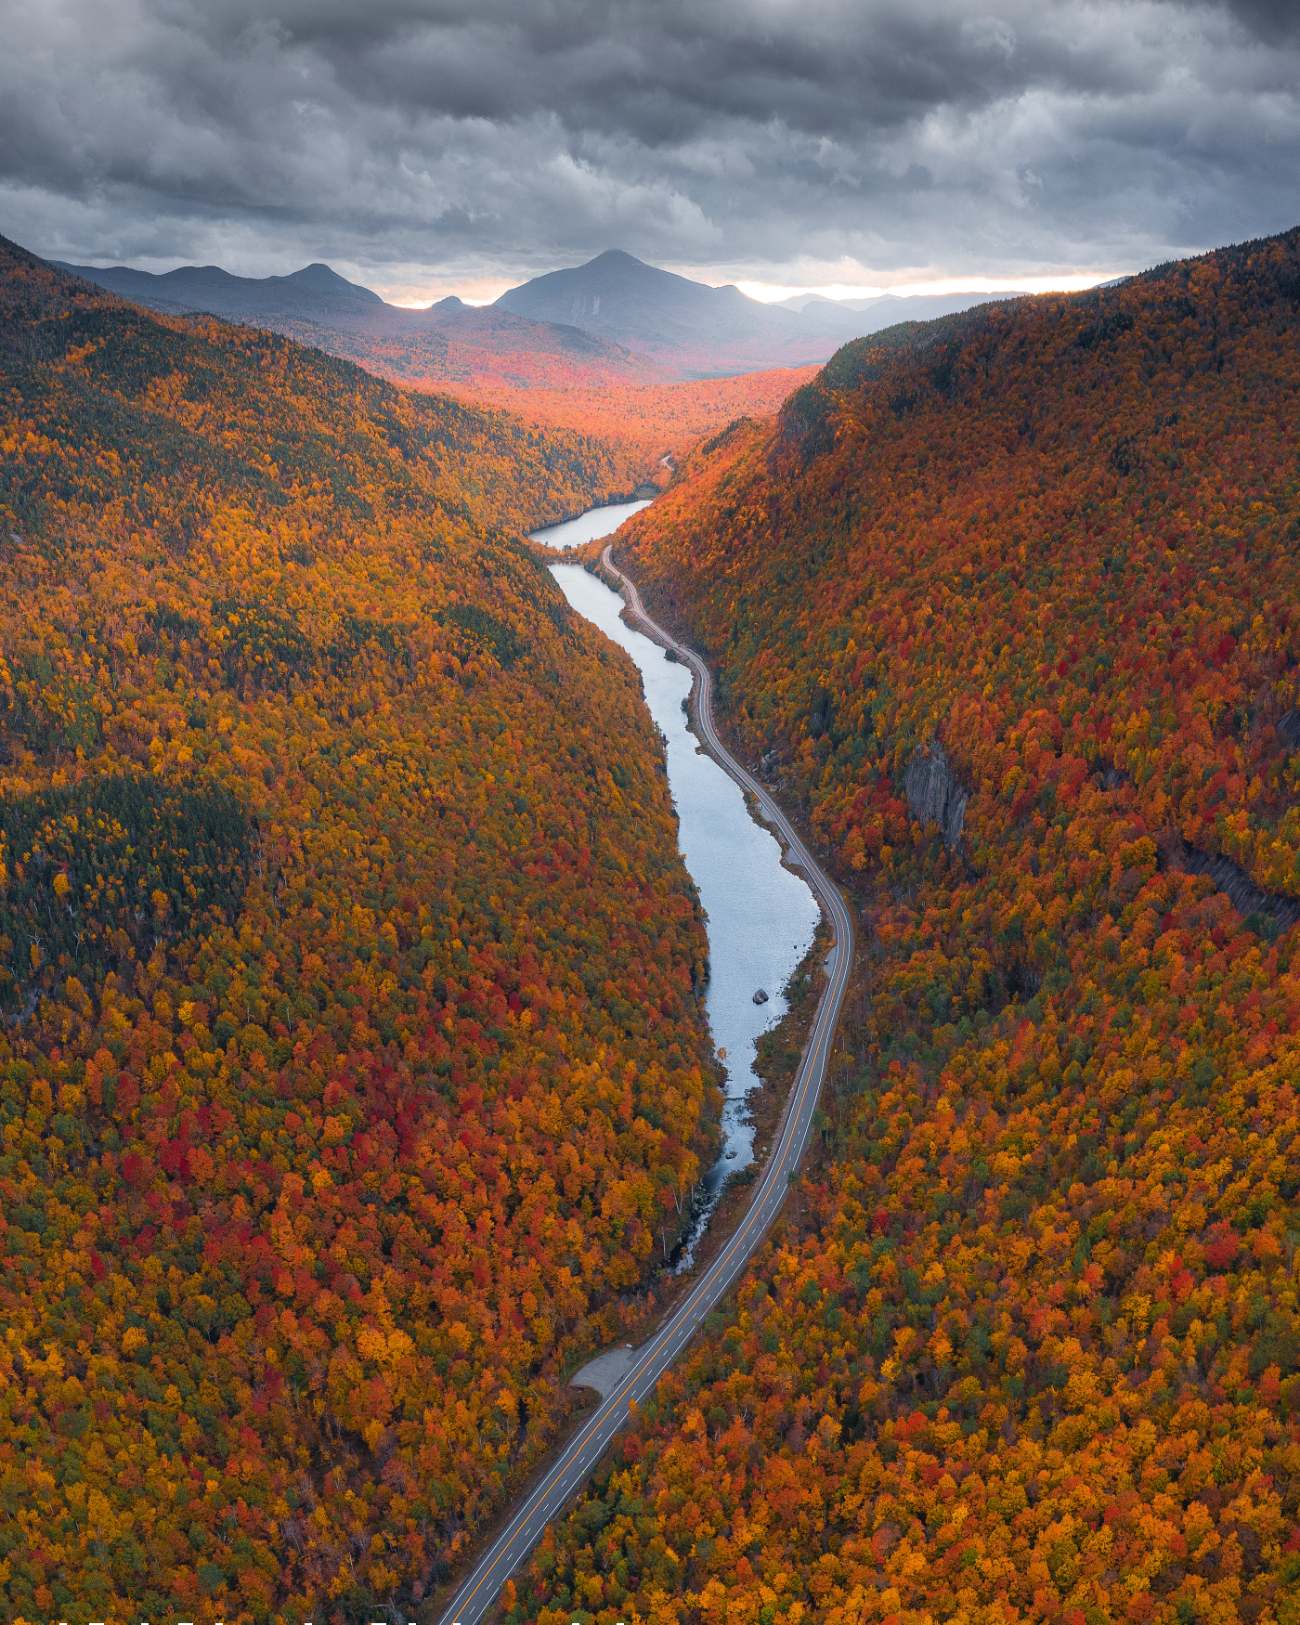 Visiting the Adirondack Mountains (New York State) in Fall